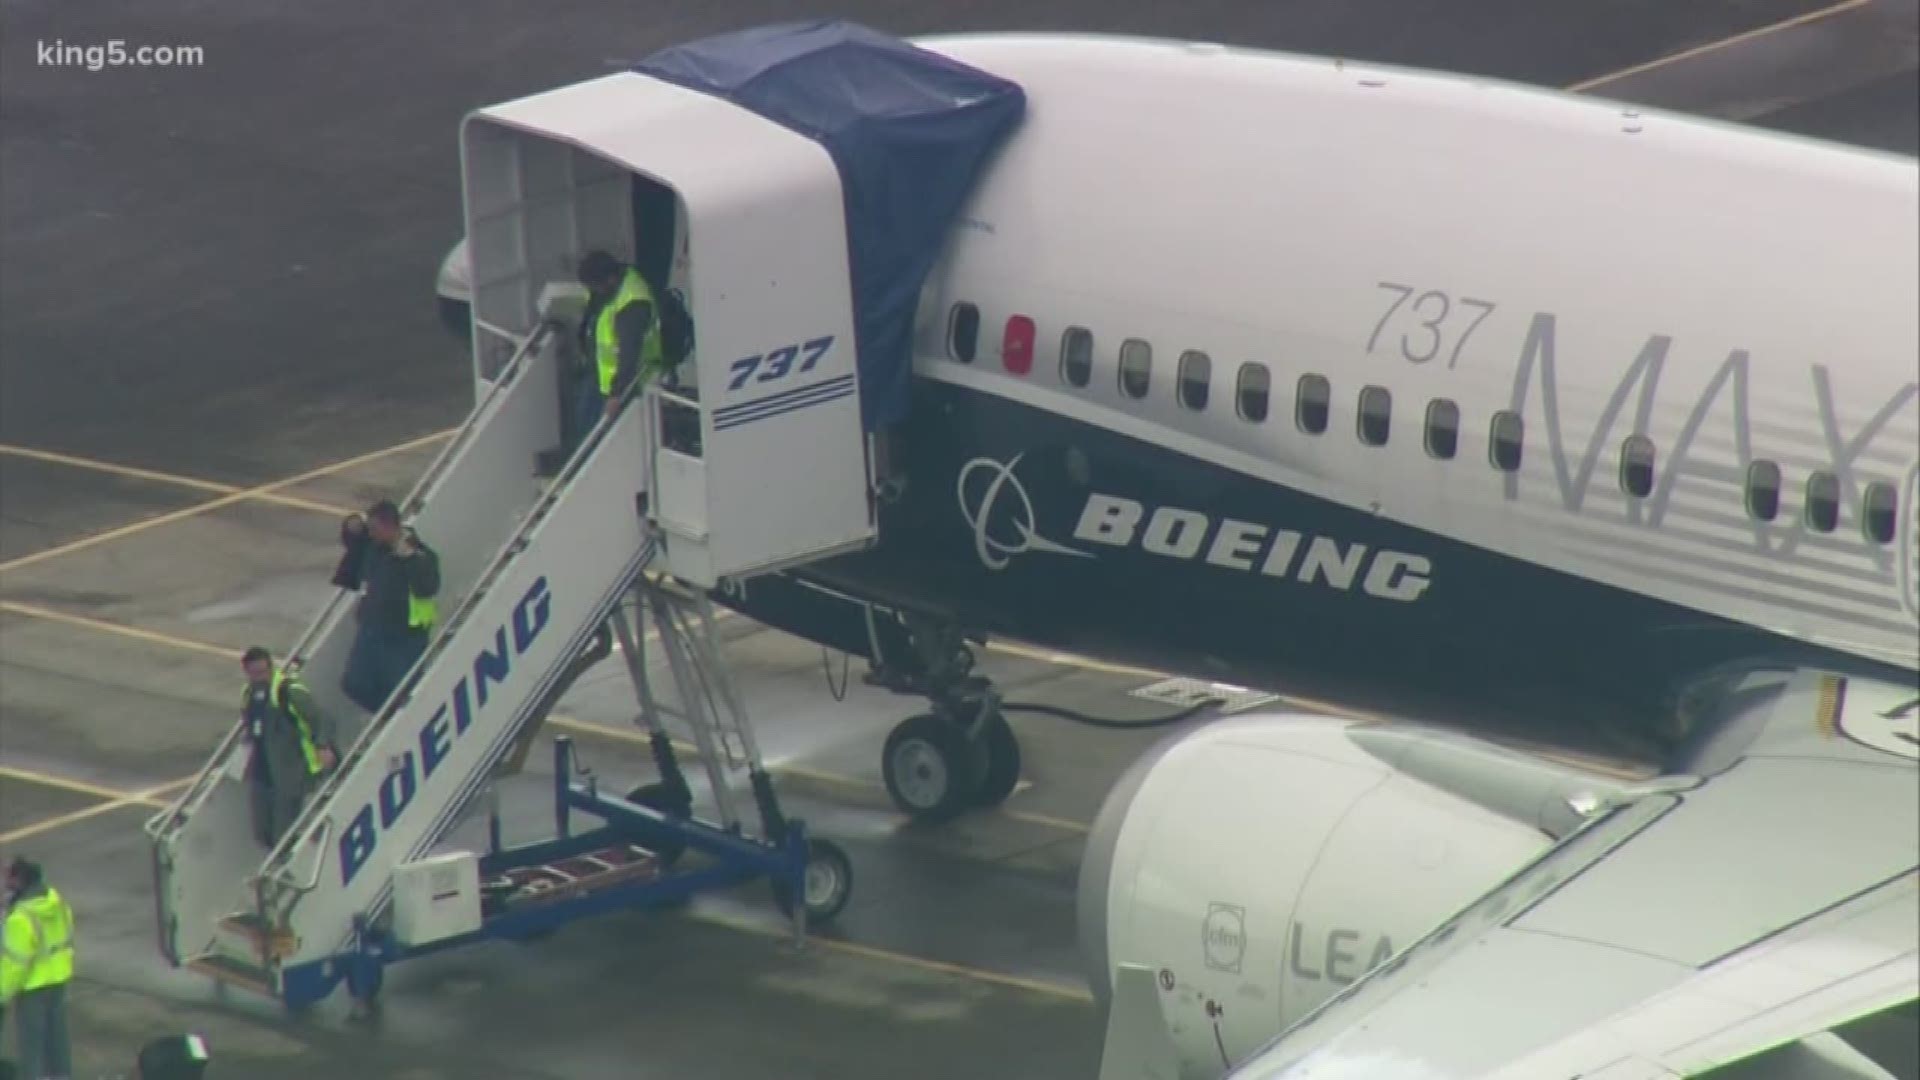 The FAA released a statement from acting FAA Administrator Daniel Elwell, saying its review shows no systemic performance issues and provides no basis to order the grounding of the Boeing 737 Max 8 aircraft. But the debate rages on. KING 5's Glenn Farley reports.